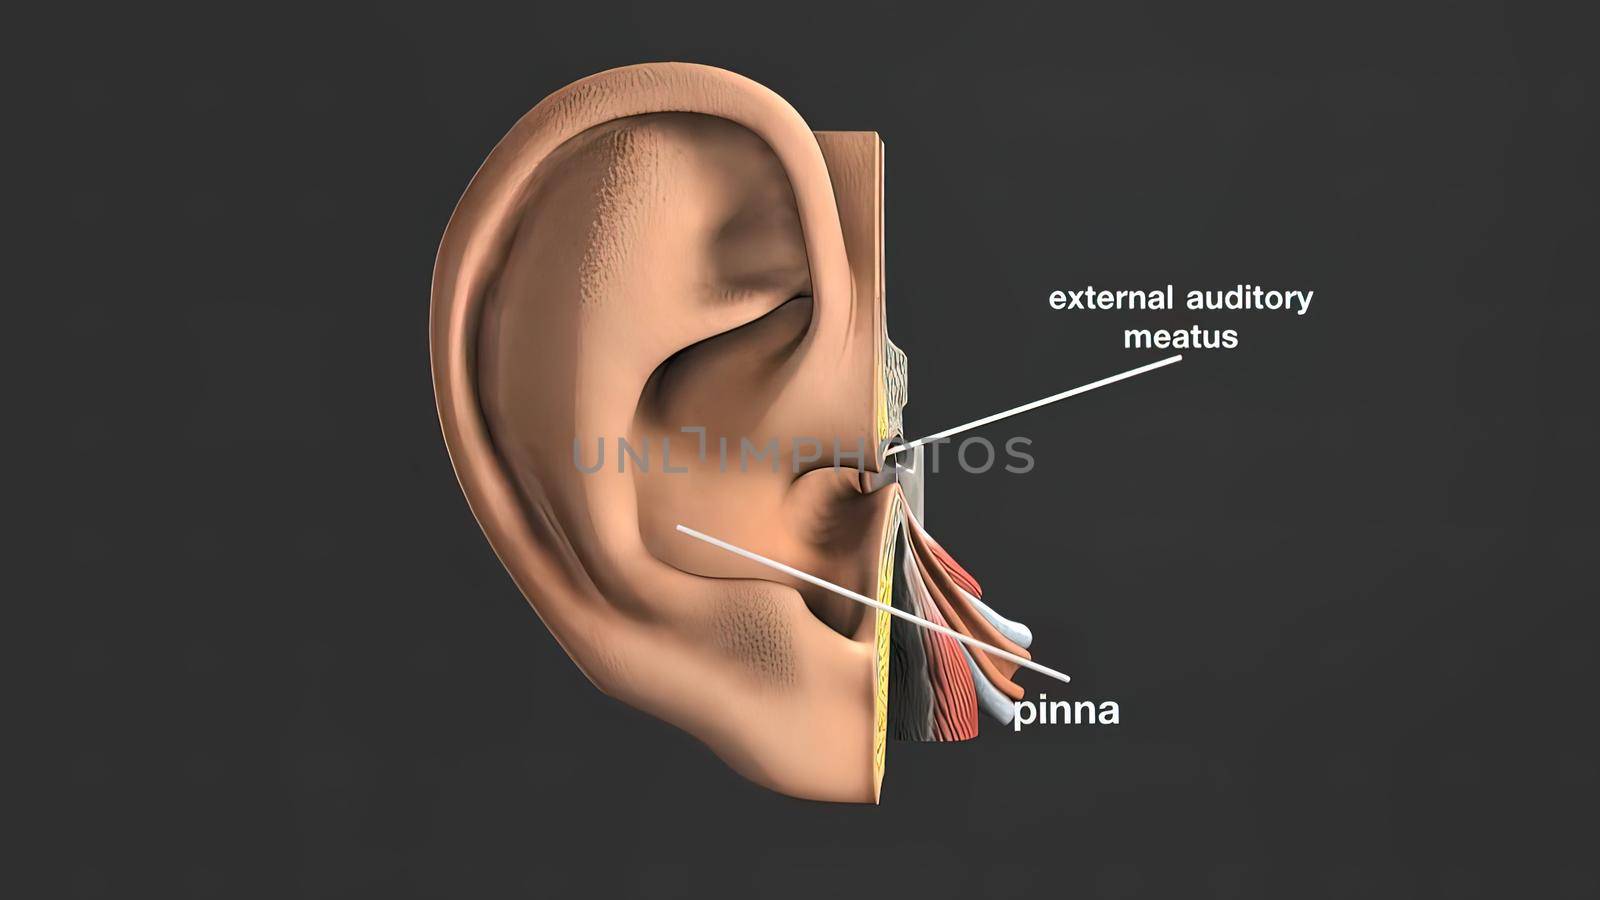 3d medical illustration of the Human Ear by creativepic